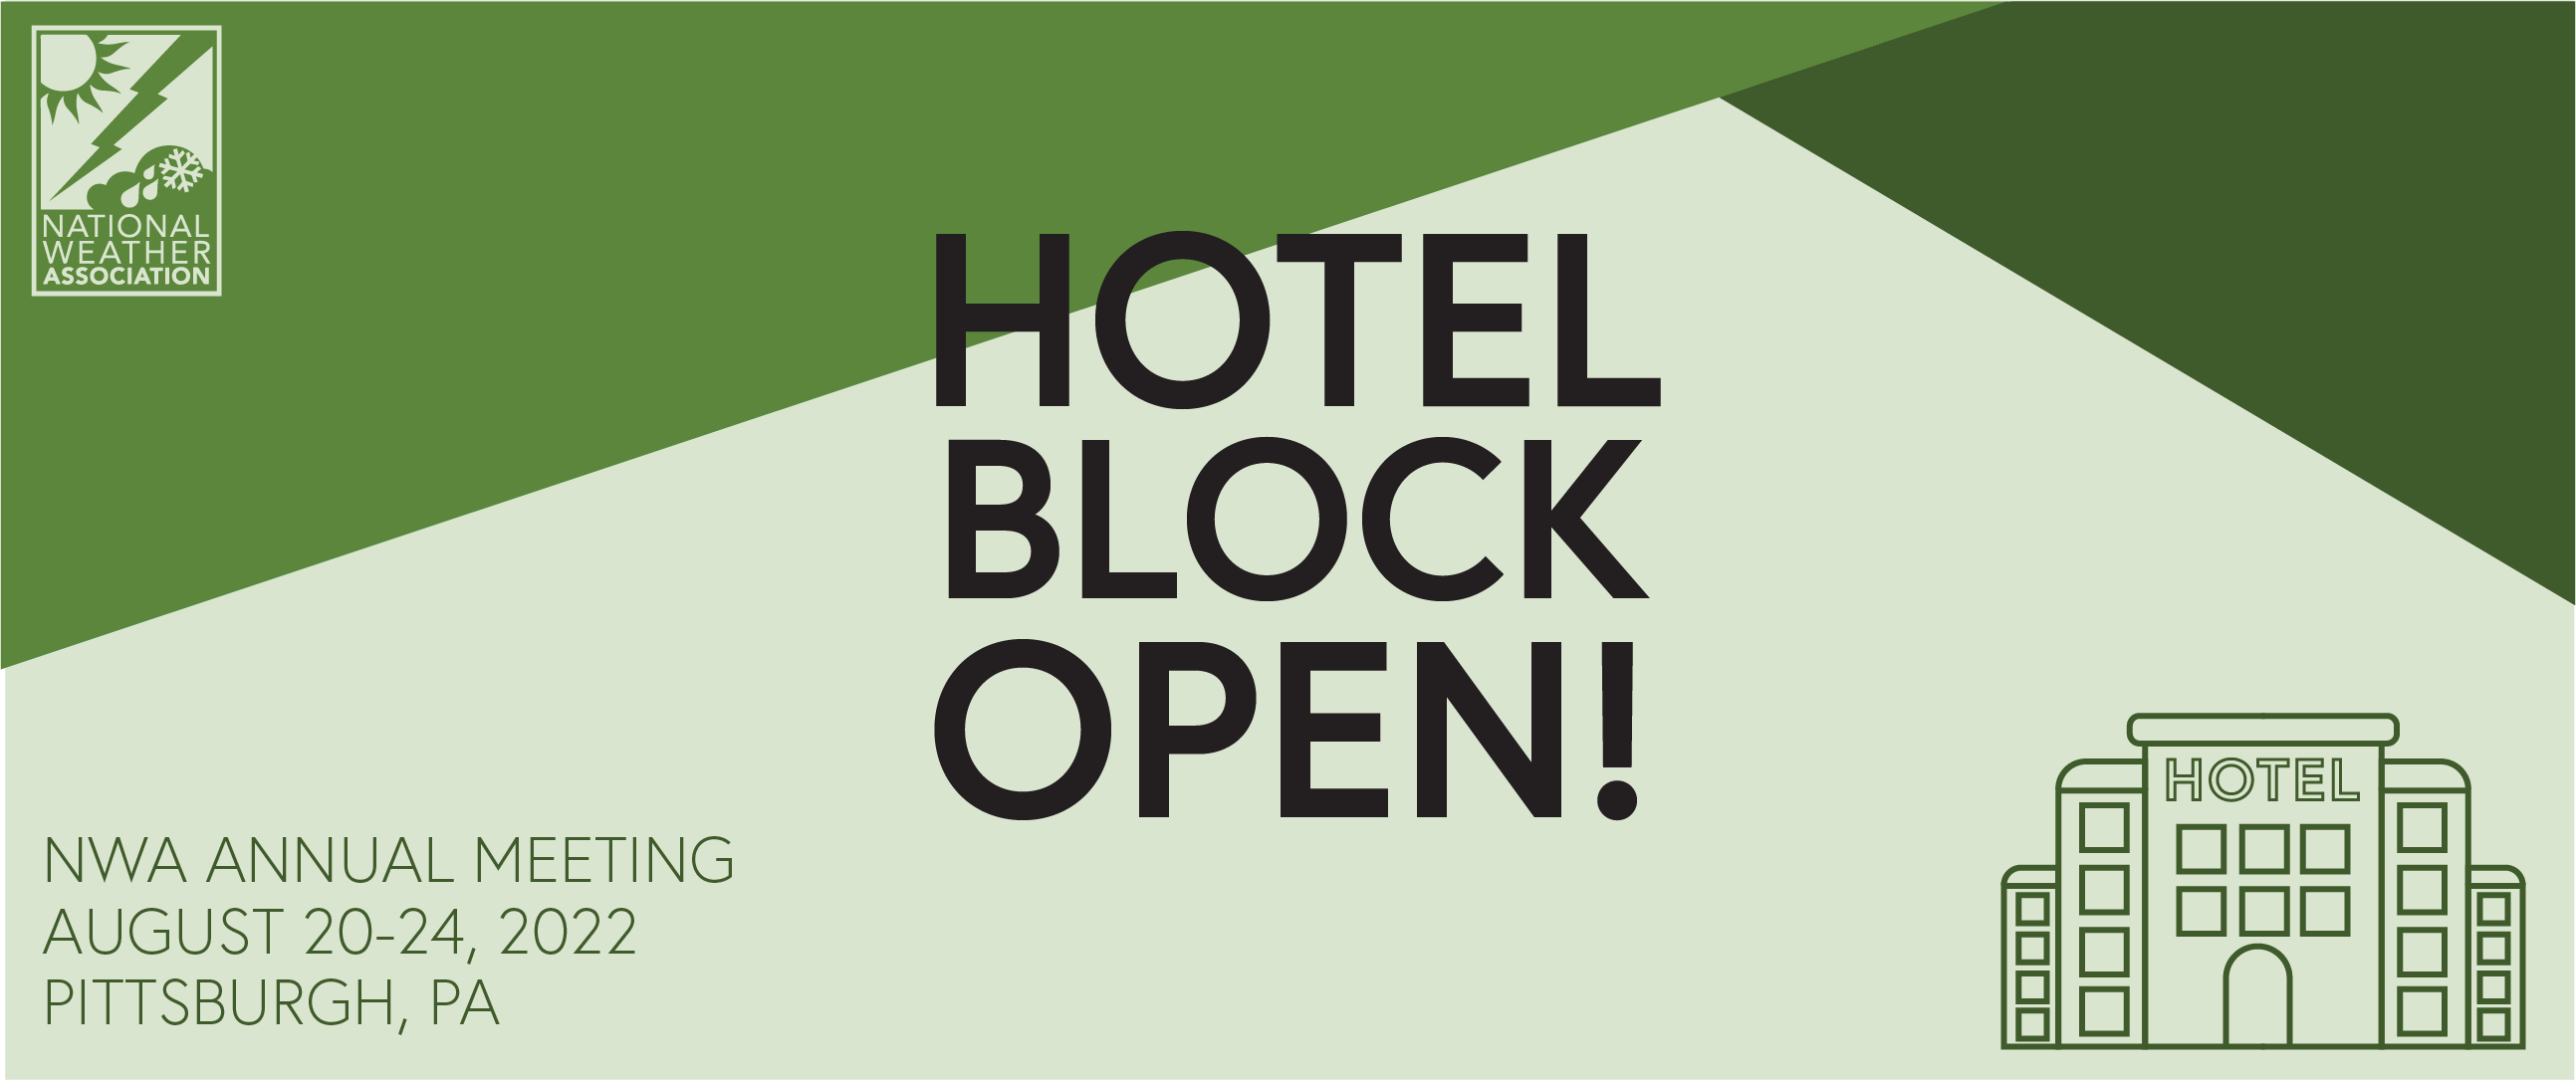 The hotel block for the 2022 NWA Hybrid Annual Meeting is now open.